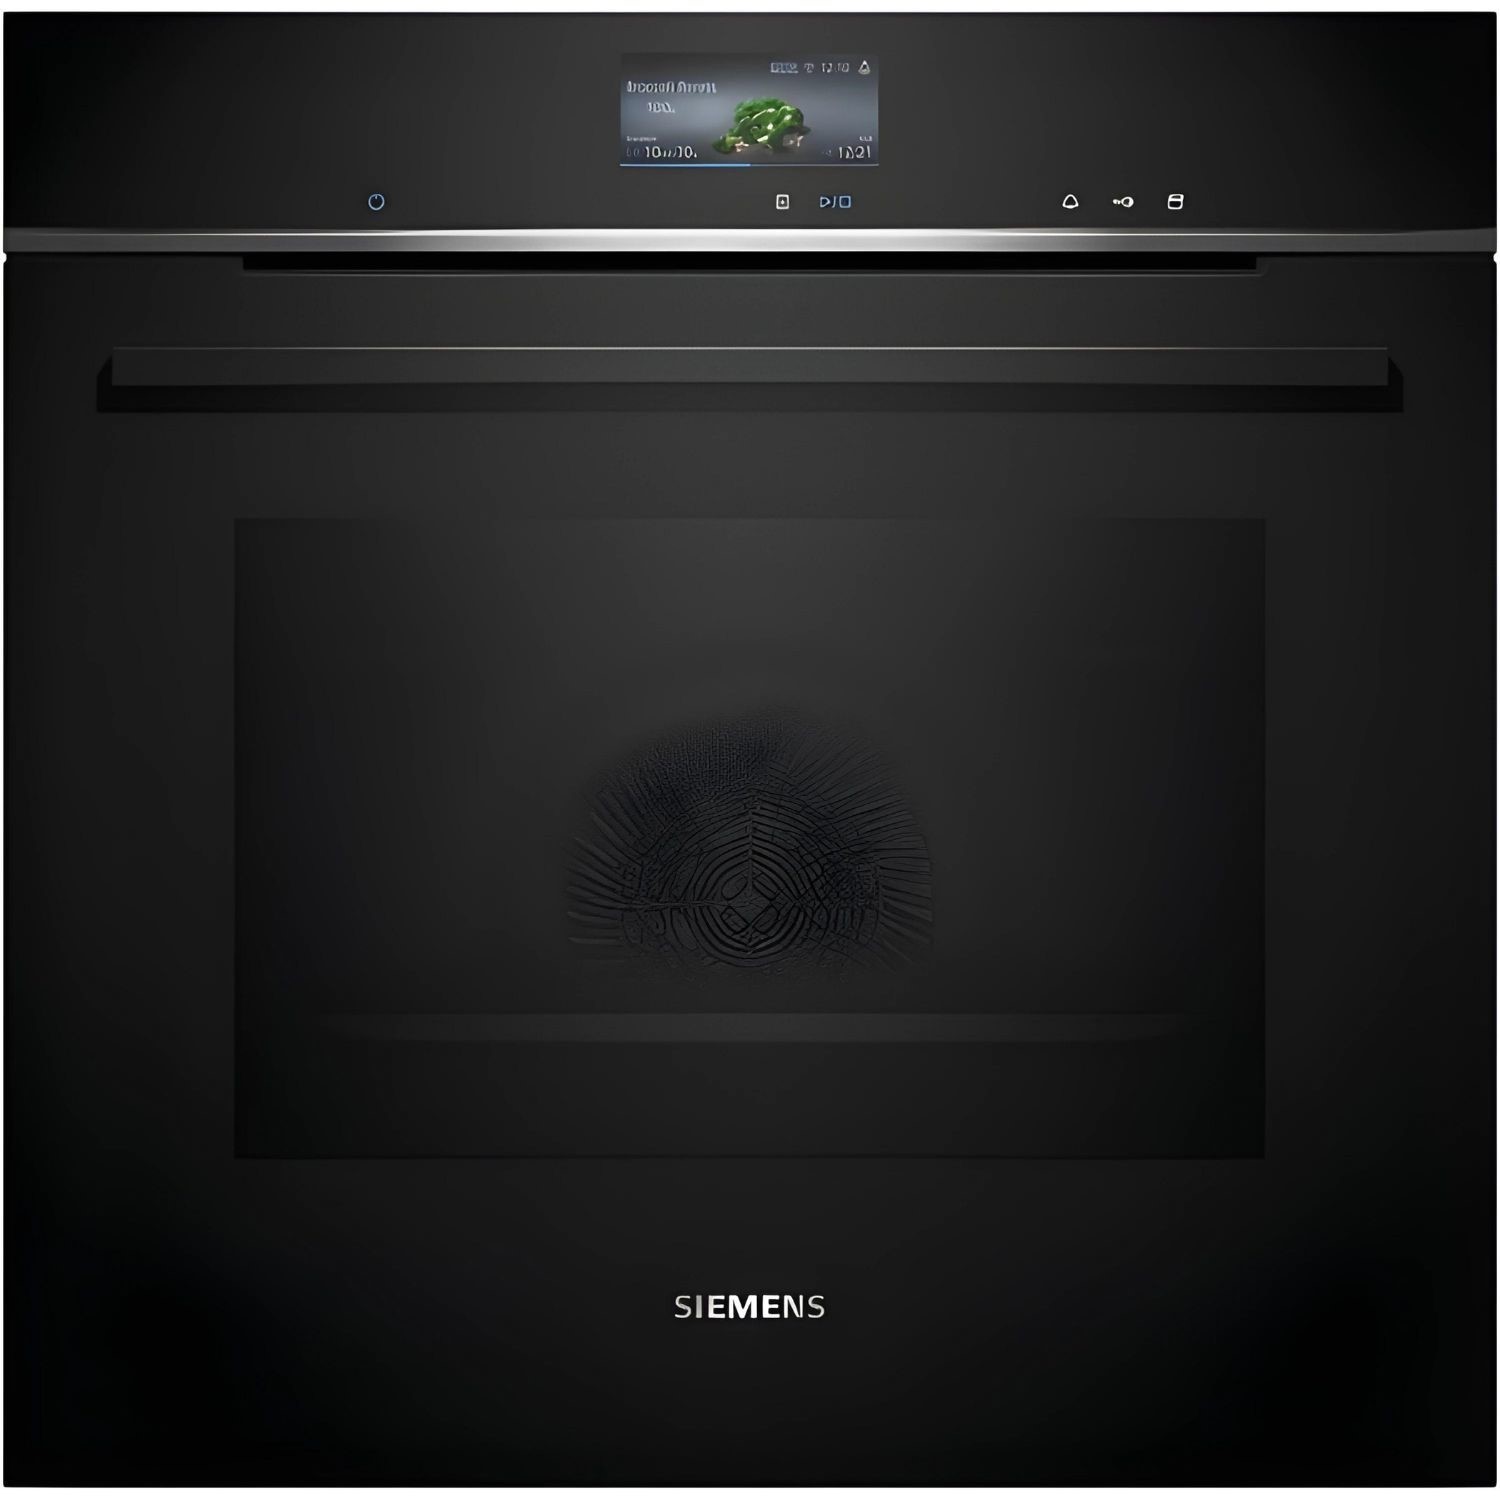 Photos - Oven Siemens iQ700 Built In Electric Single  with Steam Function - Blac HR7 